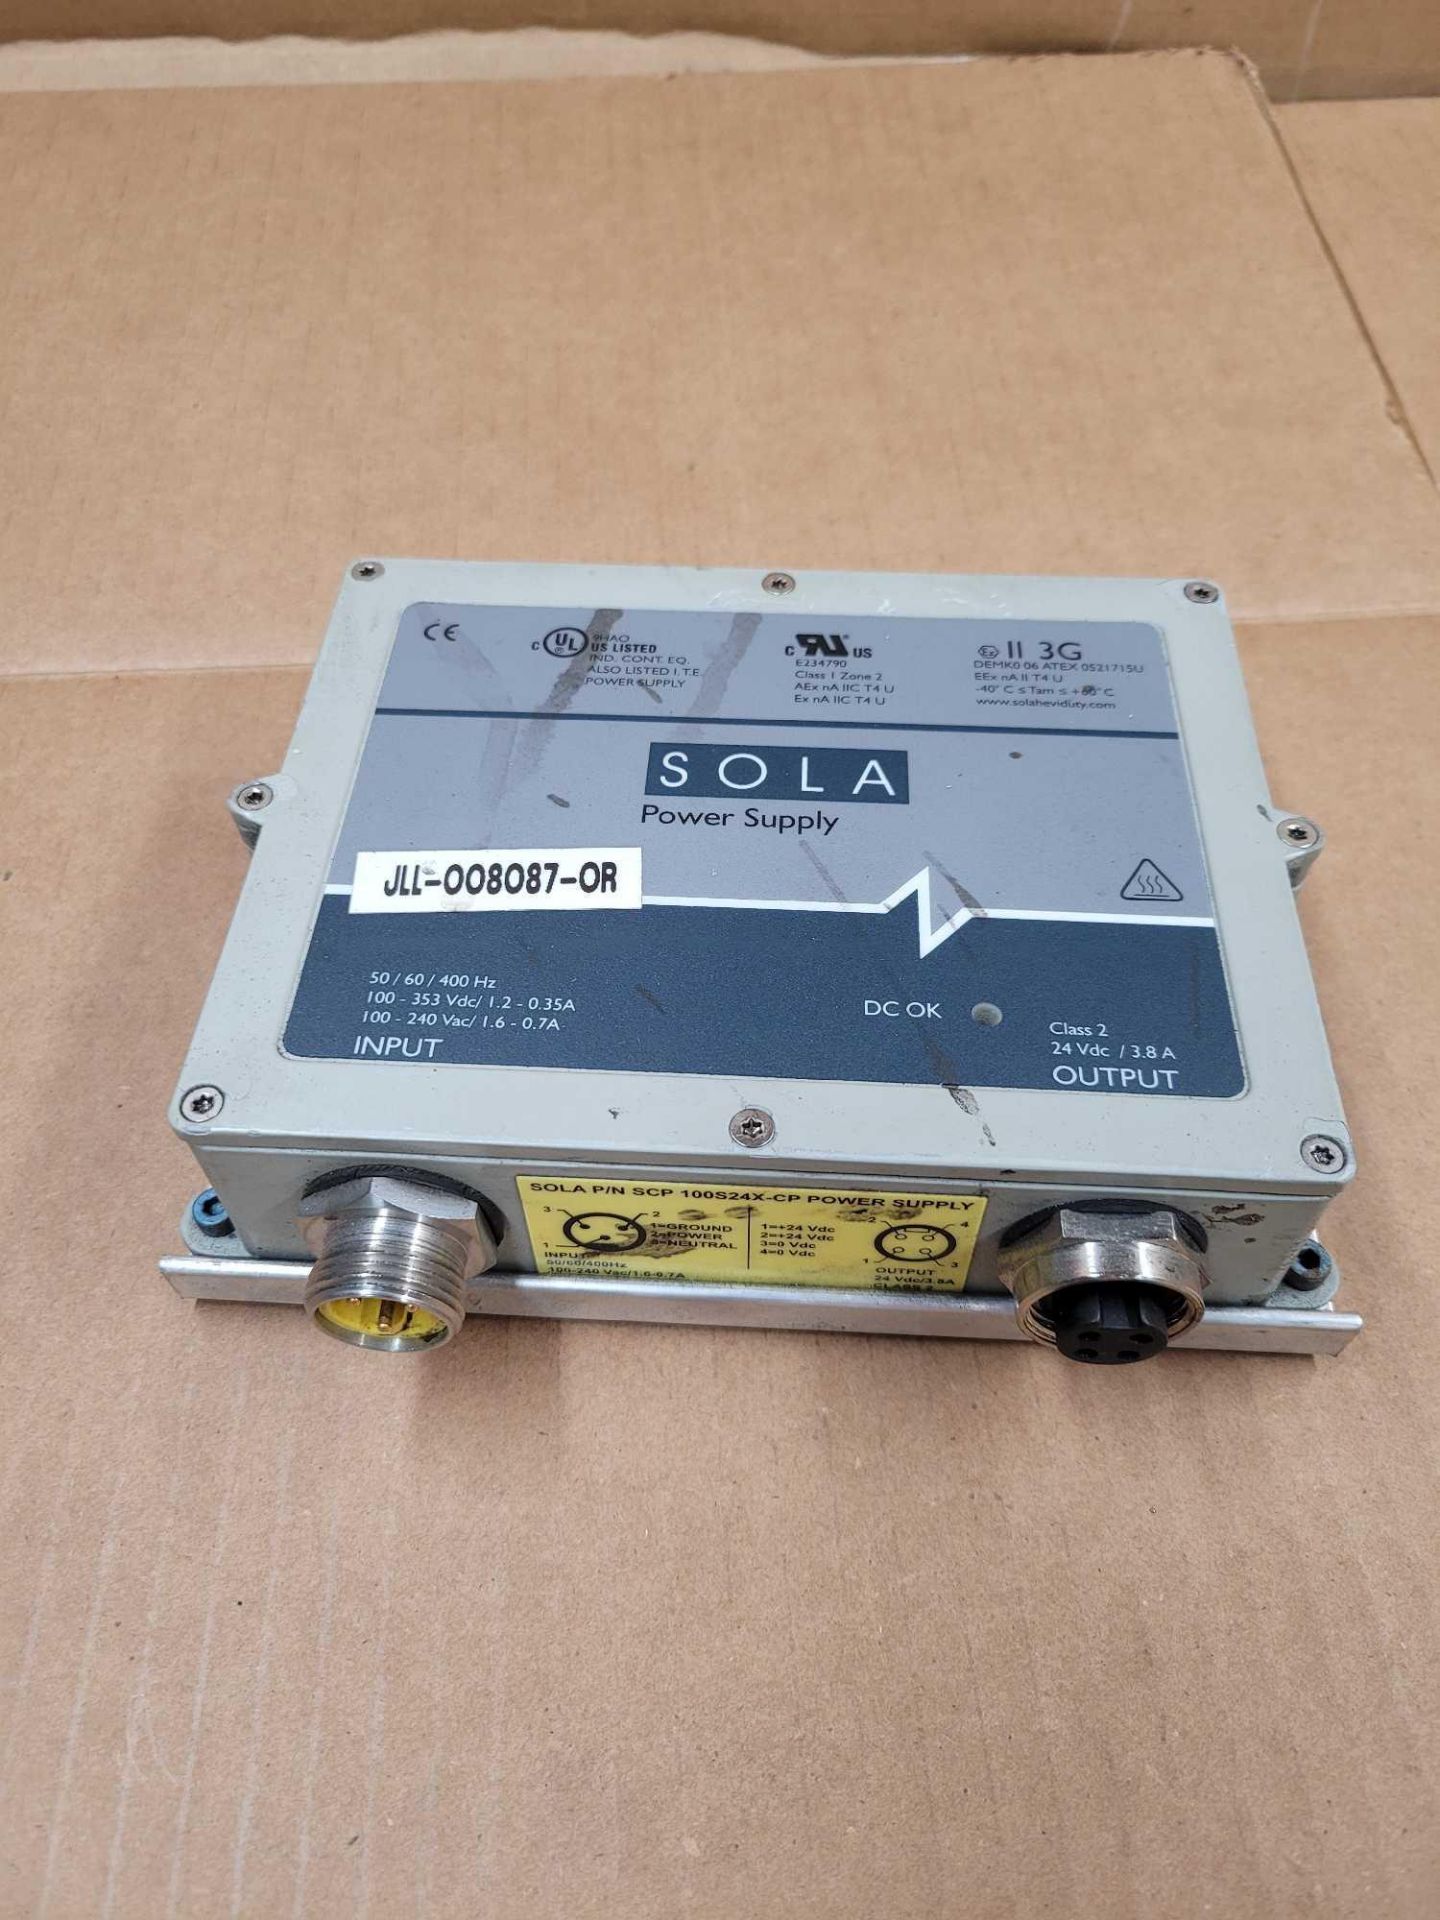 LOT OF 4 ASSORTED SOLA / (3) SCP 100S24X-CP | Power Supply  /  (1) SCP 100S24X-DVN | Power Supply - Image 3 of 12